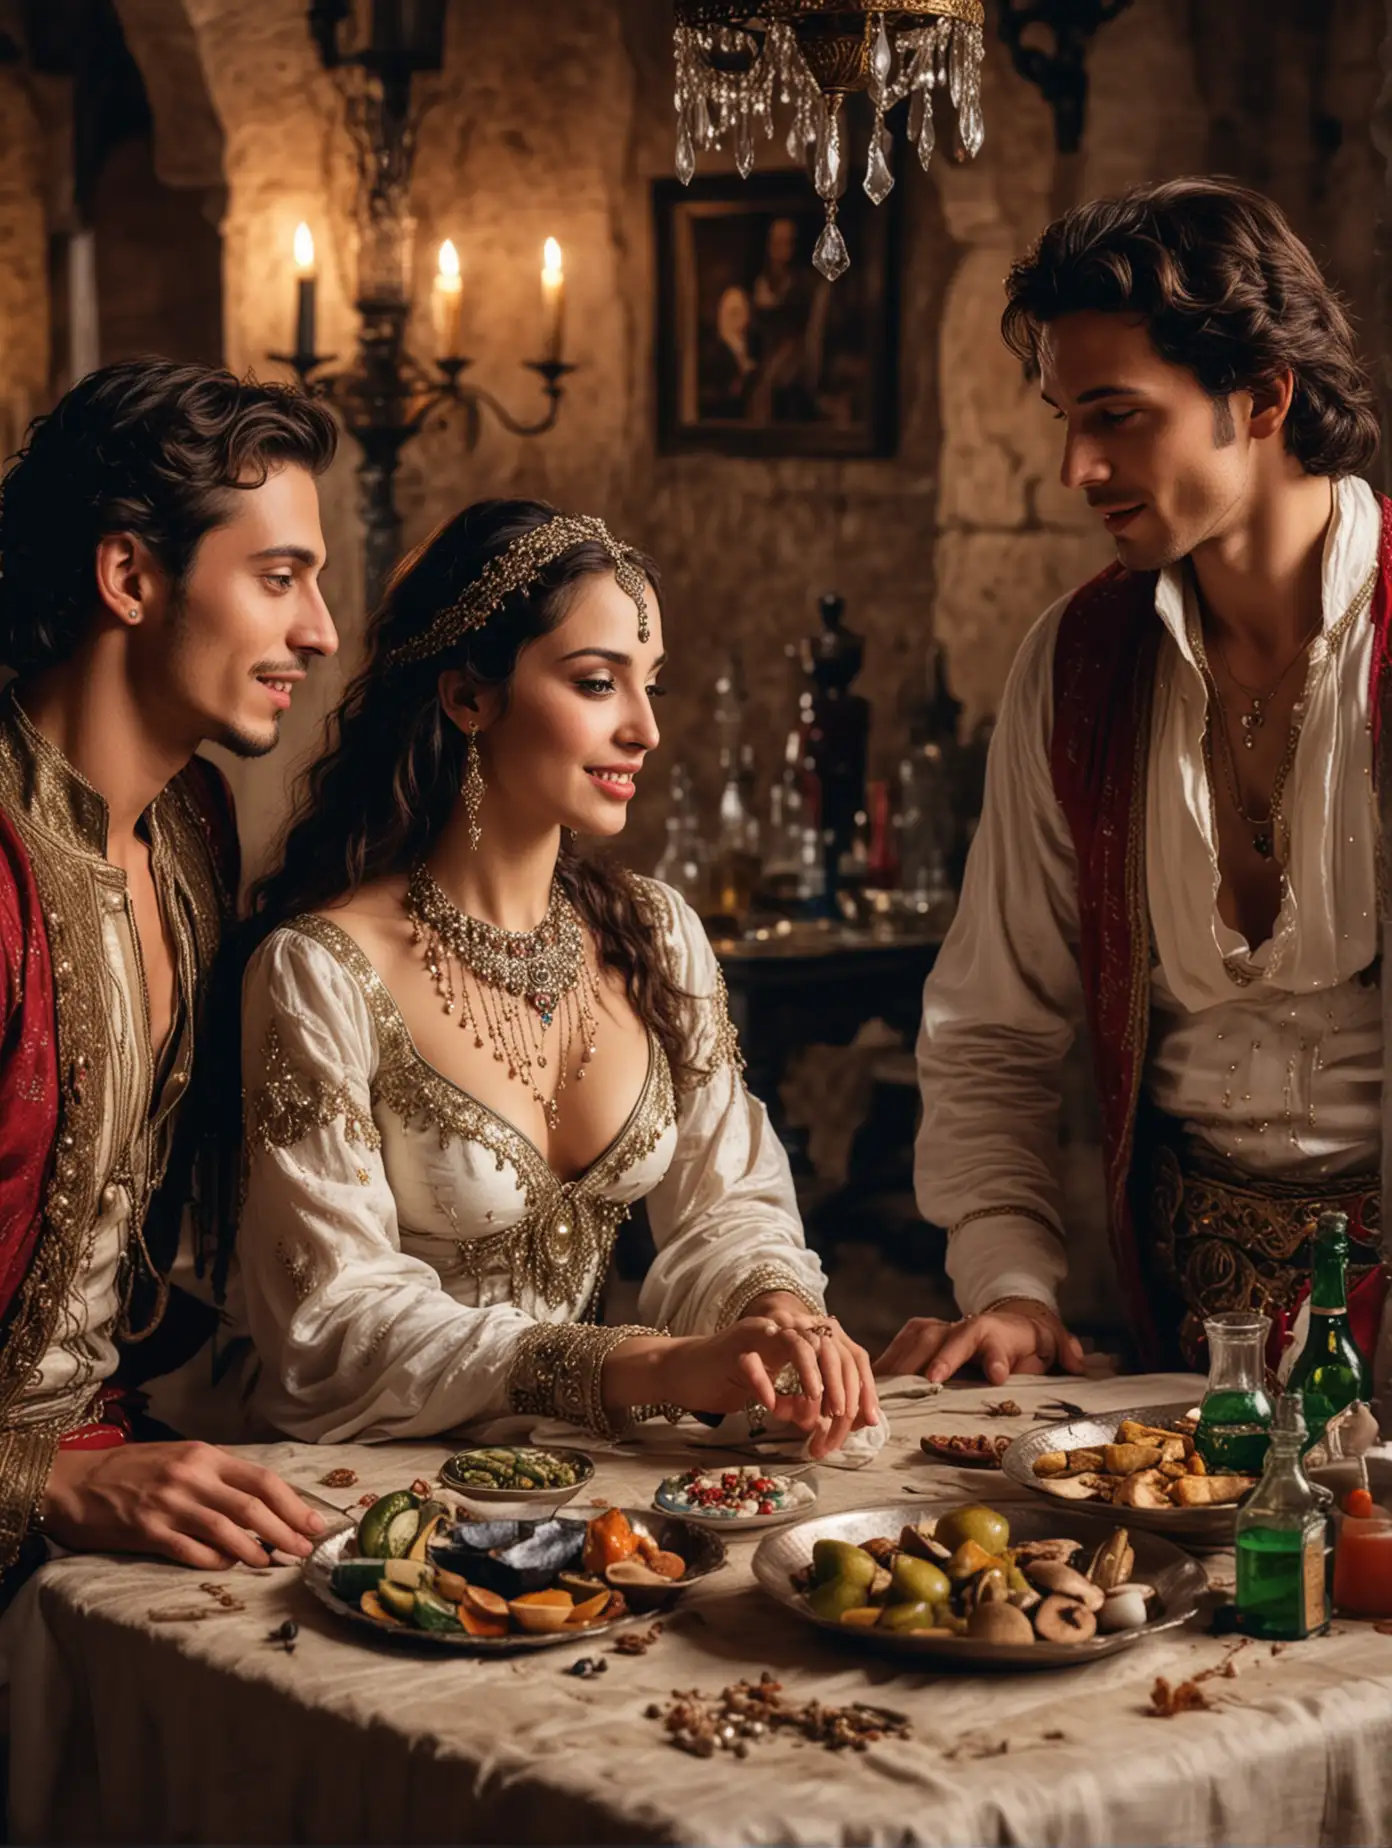 Intimate-Conversation-of-a-Belly-Dancer-with-Two-Young-Men-in-a-17th-Century-Castle-Hall